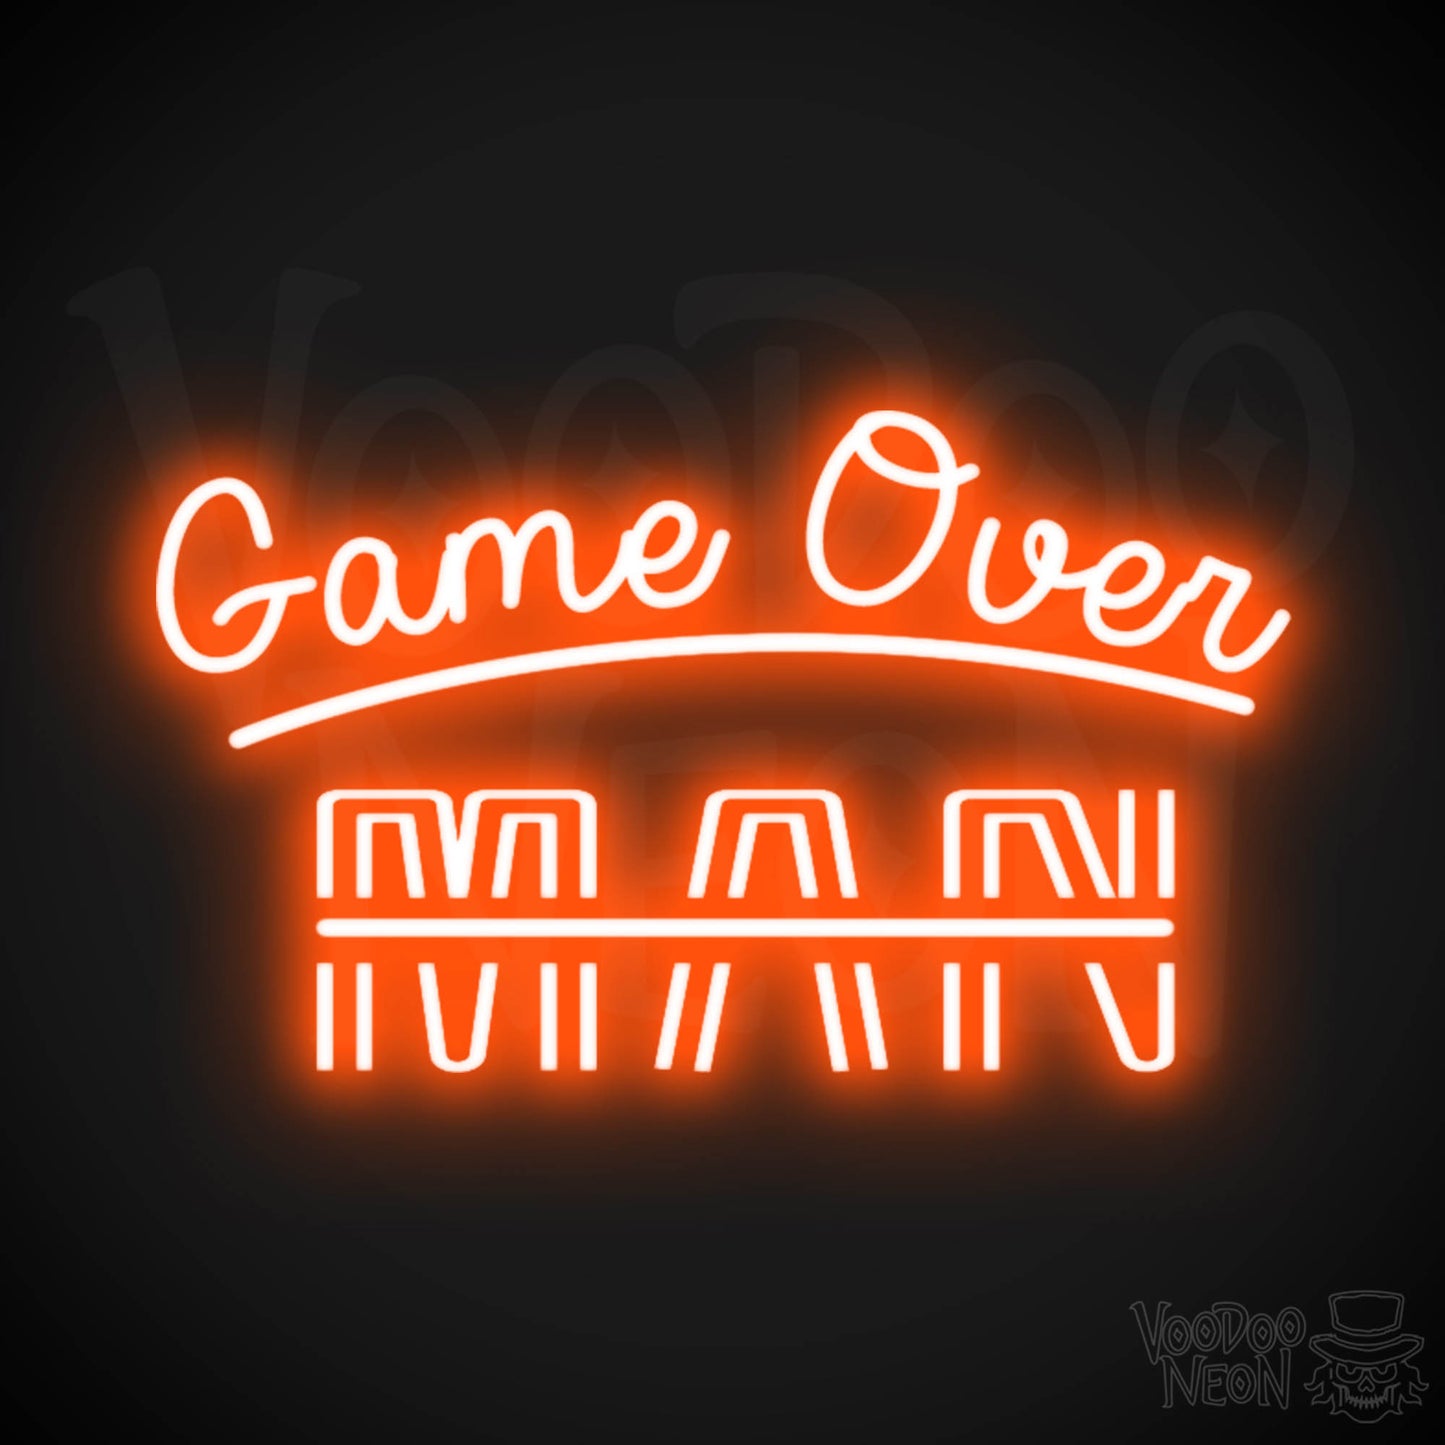 Game Over Man Neon Sign - Game Over Man Light Up Sign - Wall Art - Color Orange